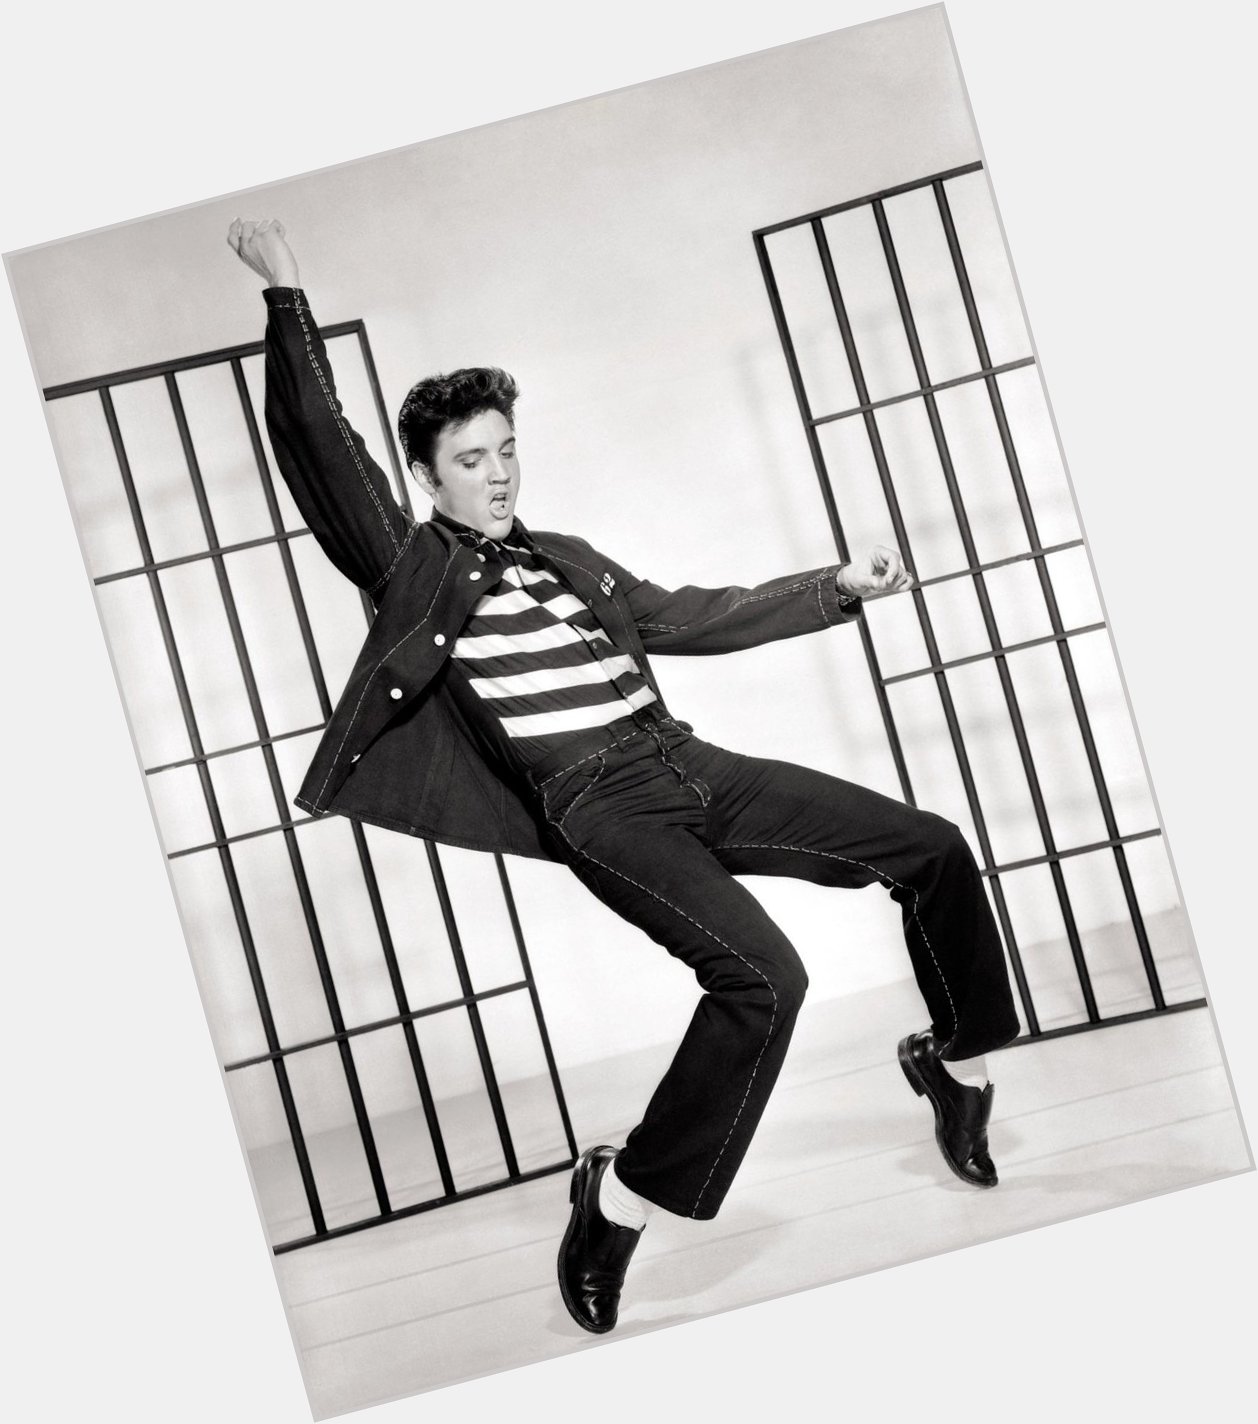 Happy Birthday to Elvis Presley, who would have turned 80 today! 